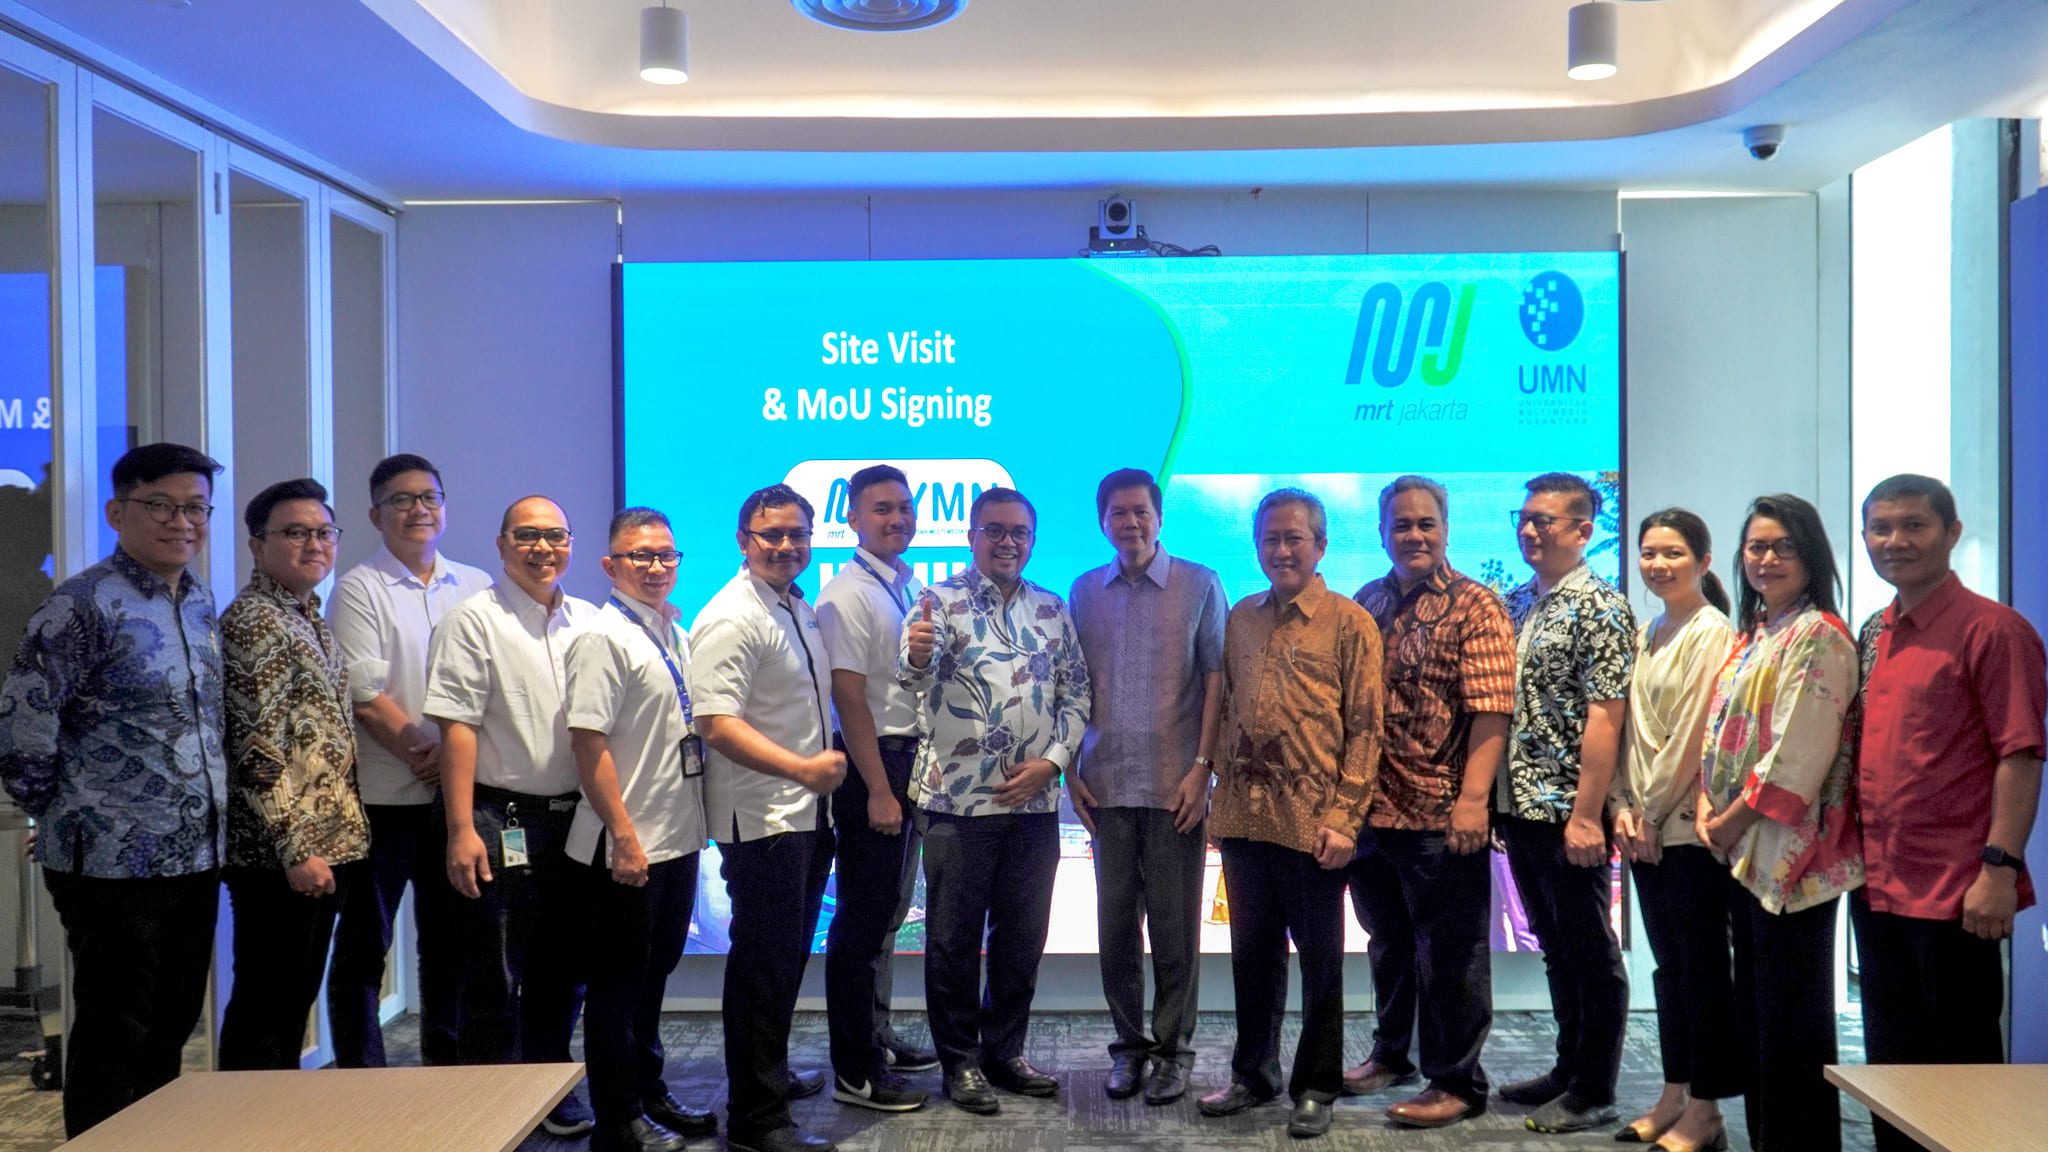 Multimedia Nusantara University Collaborates with MRT Jakarta to Open Business Opportunities, Technology Development, and Human Resources